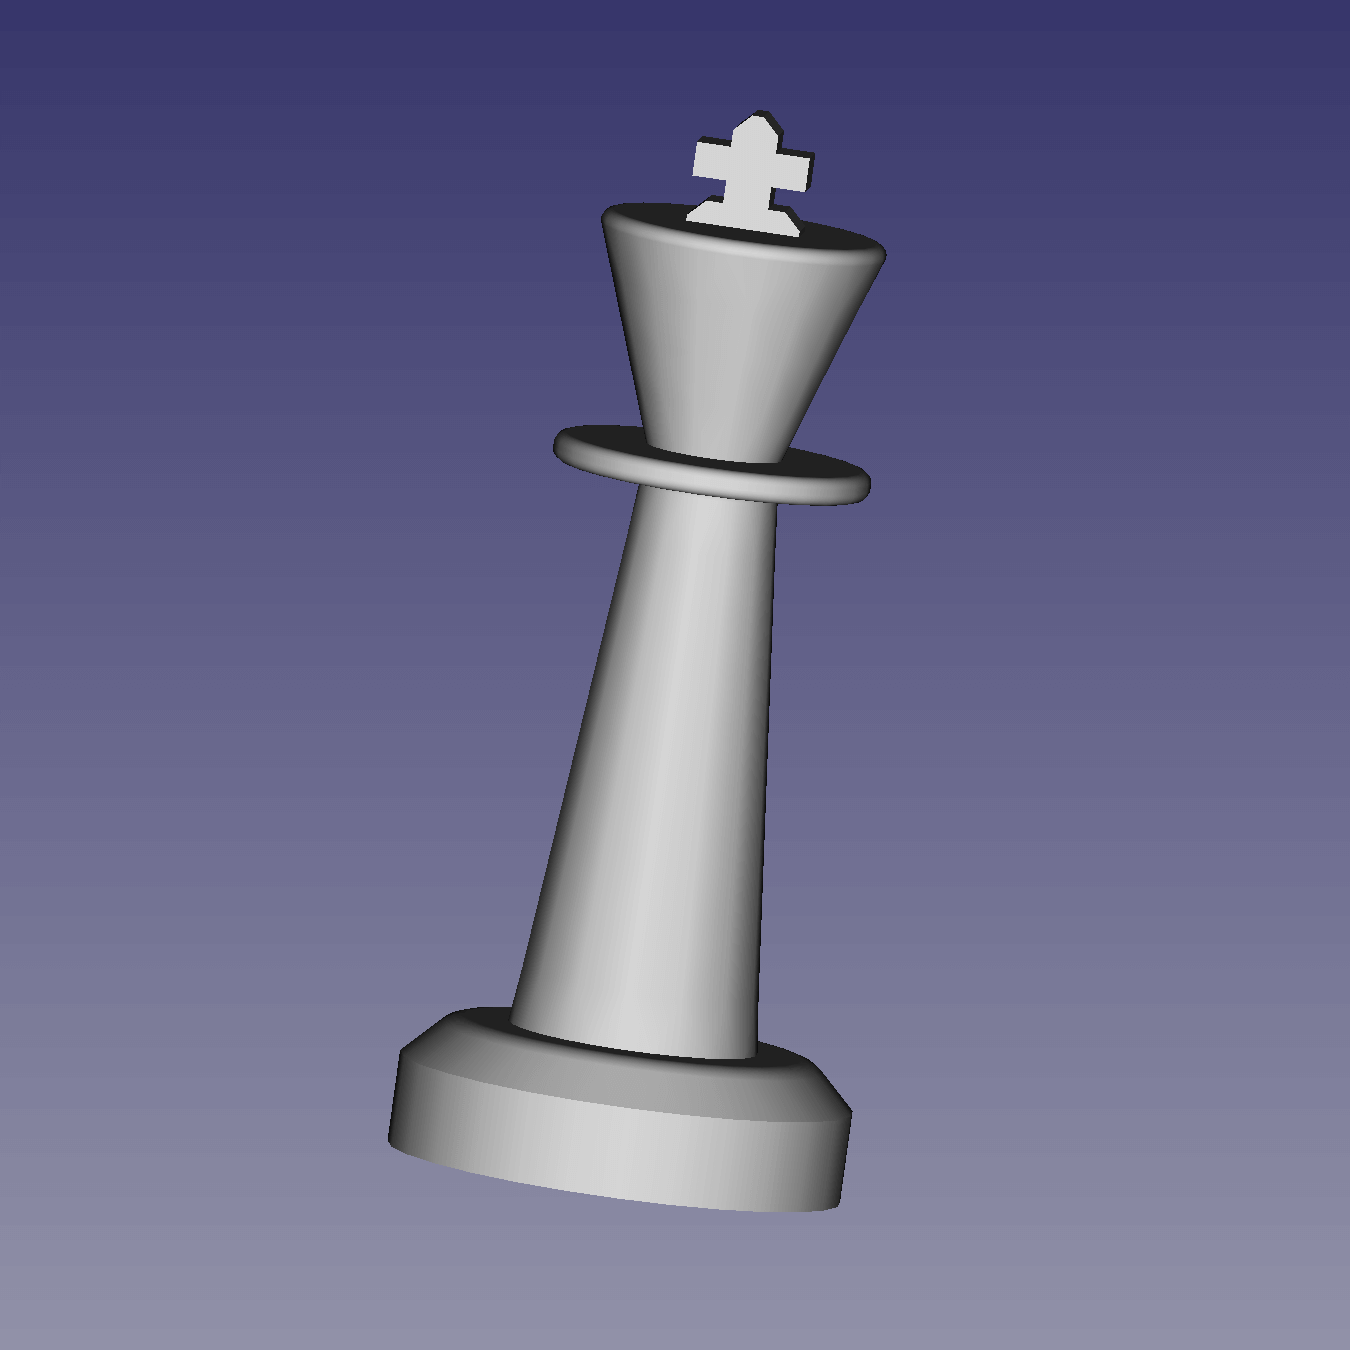 Chess Piece - The King  Solidworks tutorial, Autocad tutorial, Chess